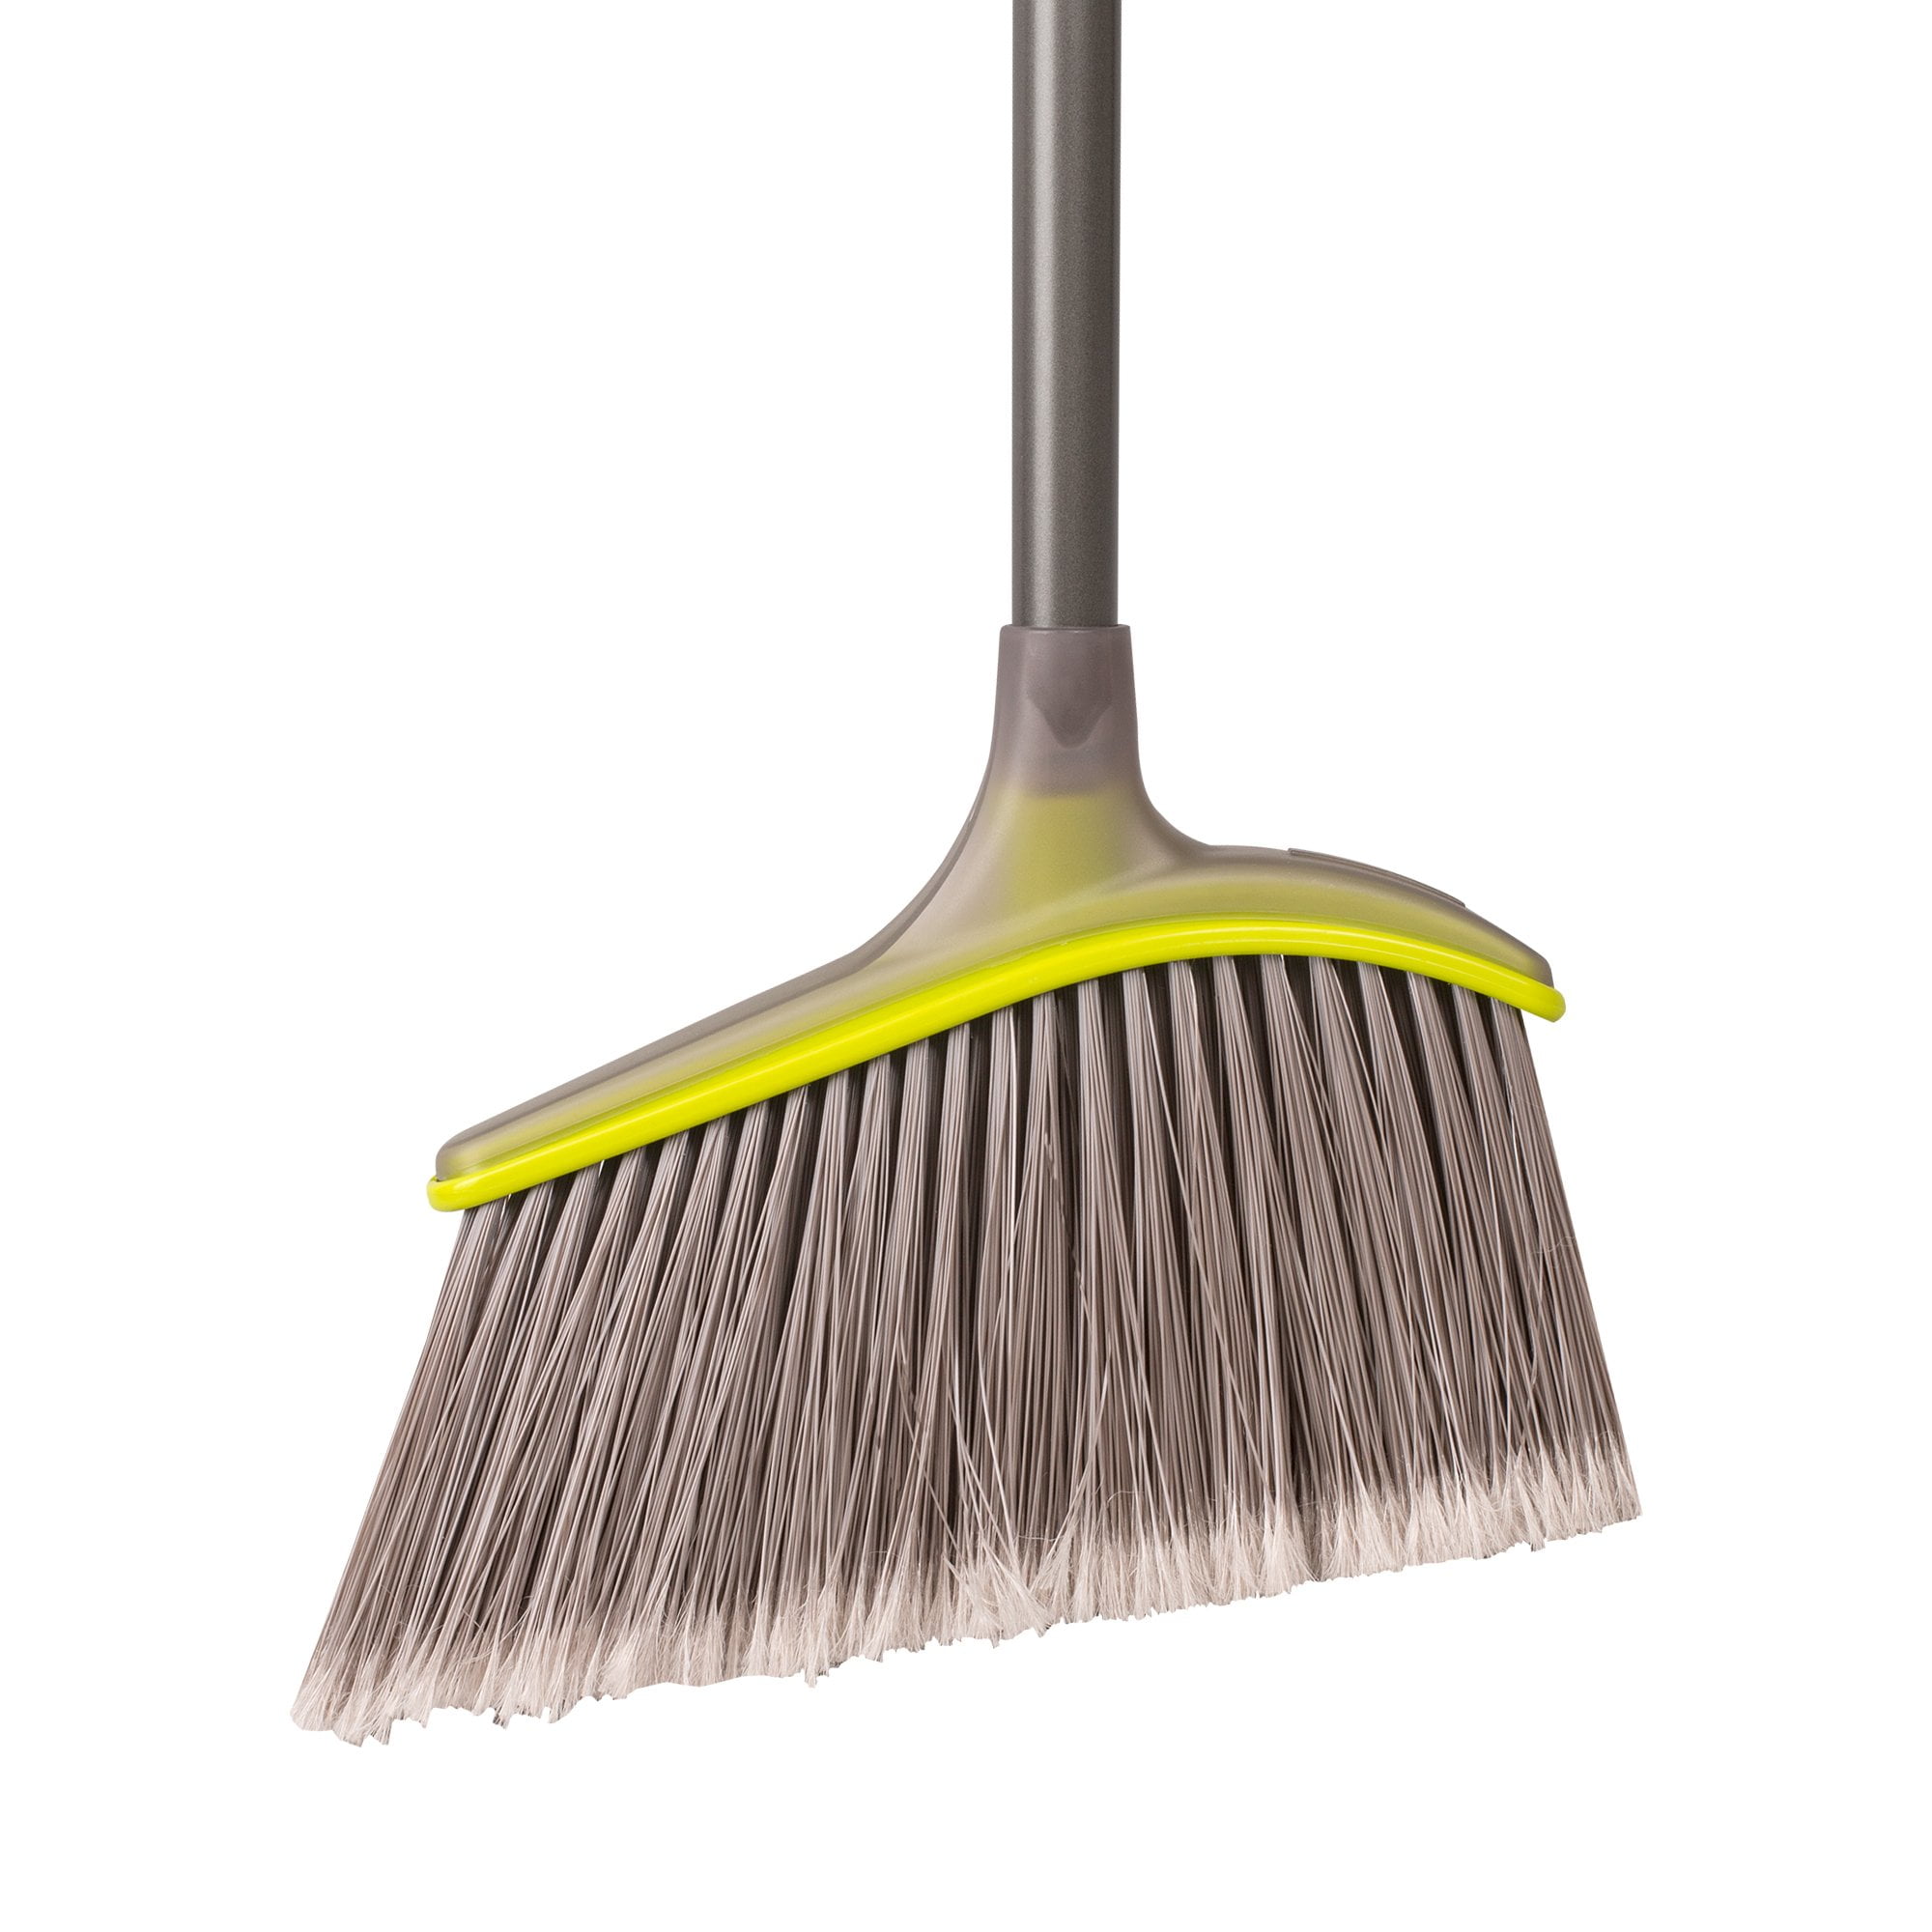 Rubbermaid® Brute® Angled Lobby Broom Angle Brooms & Reviews